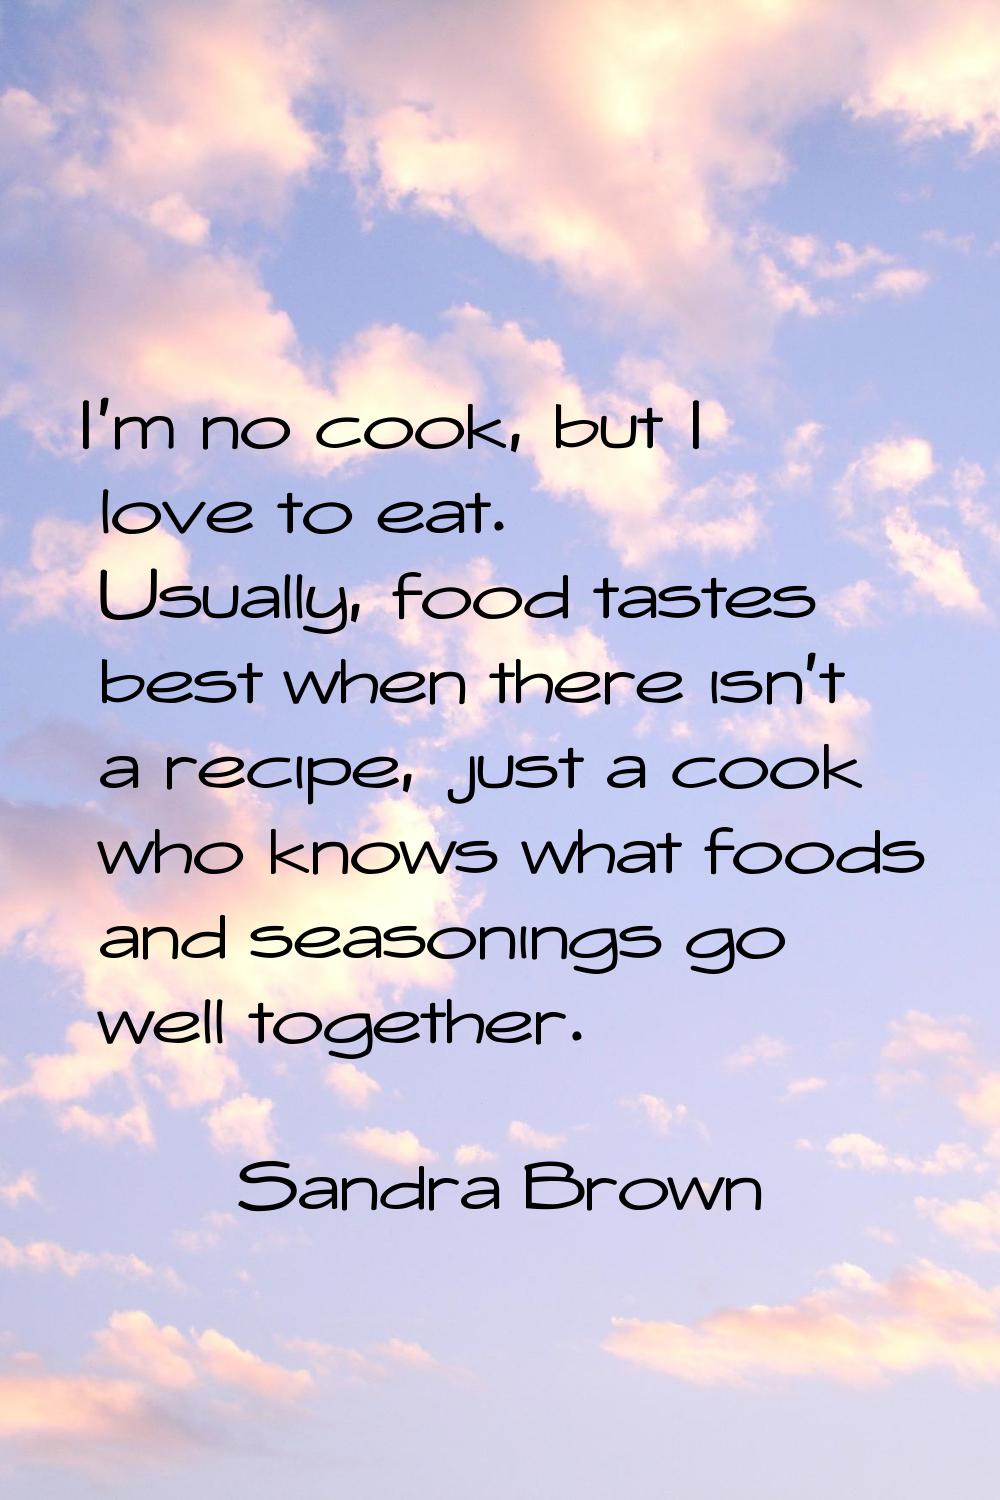 I'm no cook, but I love to eat. Usually, food tastes best when there isn't a recipe, just a cook wh